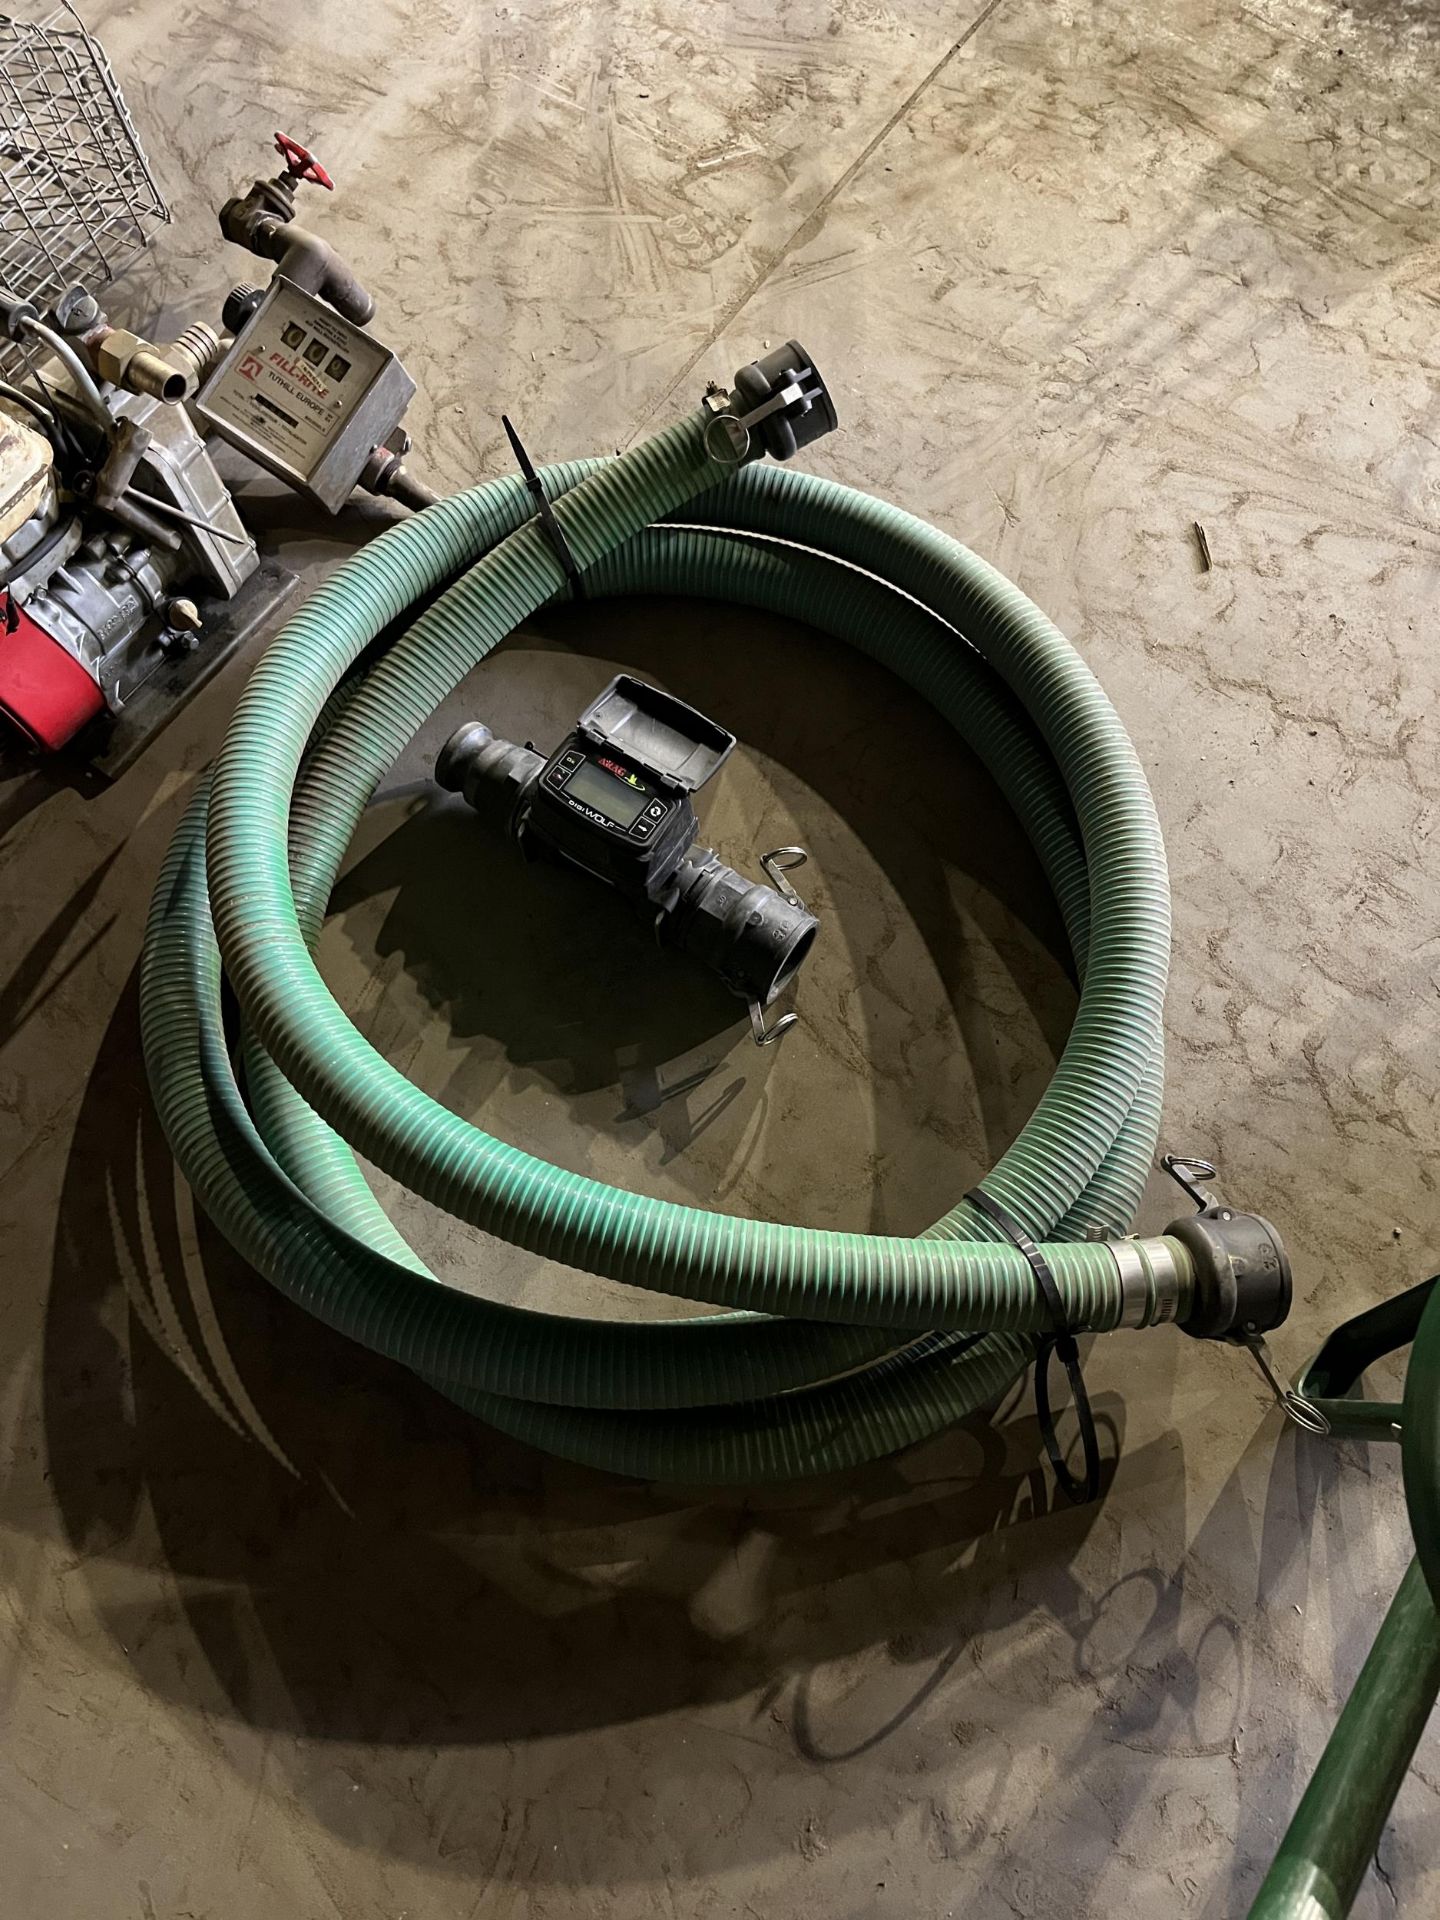 SPRAYER SUCTION HOSE AND ARAG WATER METER